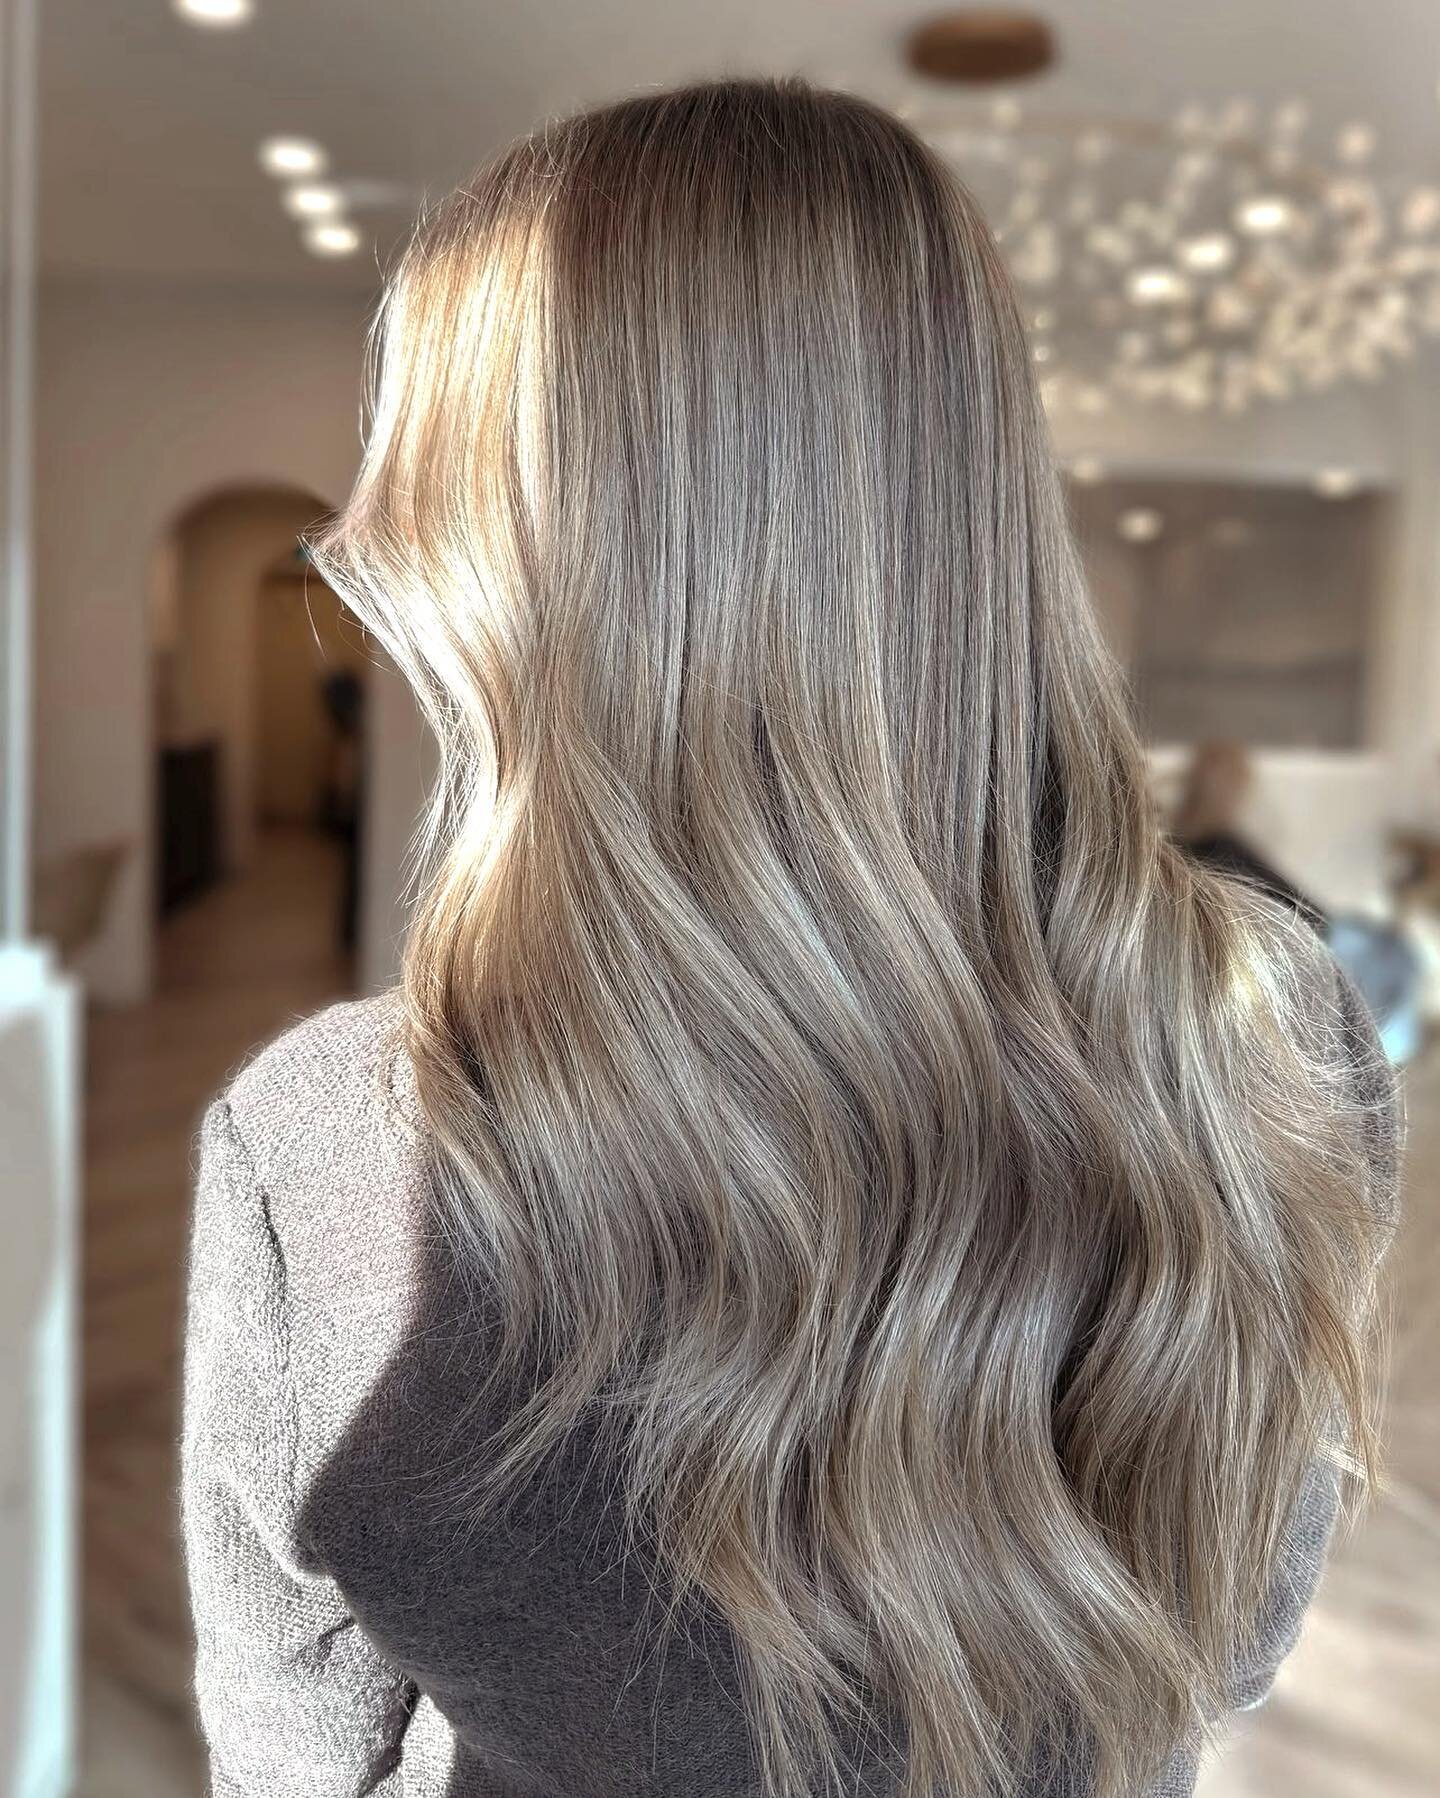 the dimensional bronde you&rsquo;ve been dreaming about ✨☁️ @thebeigelabelsalon #hairyoucanlivein
⠀
📞 587-575-3755
💻 thebeigelabel.com